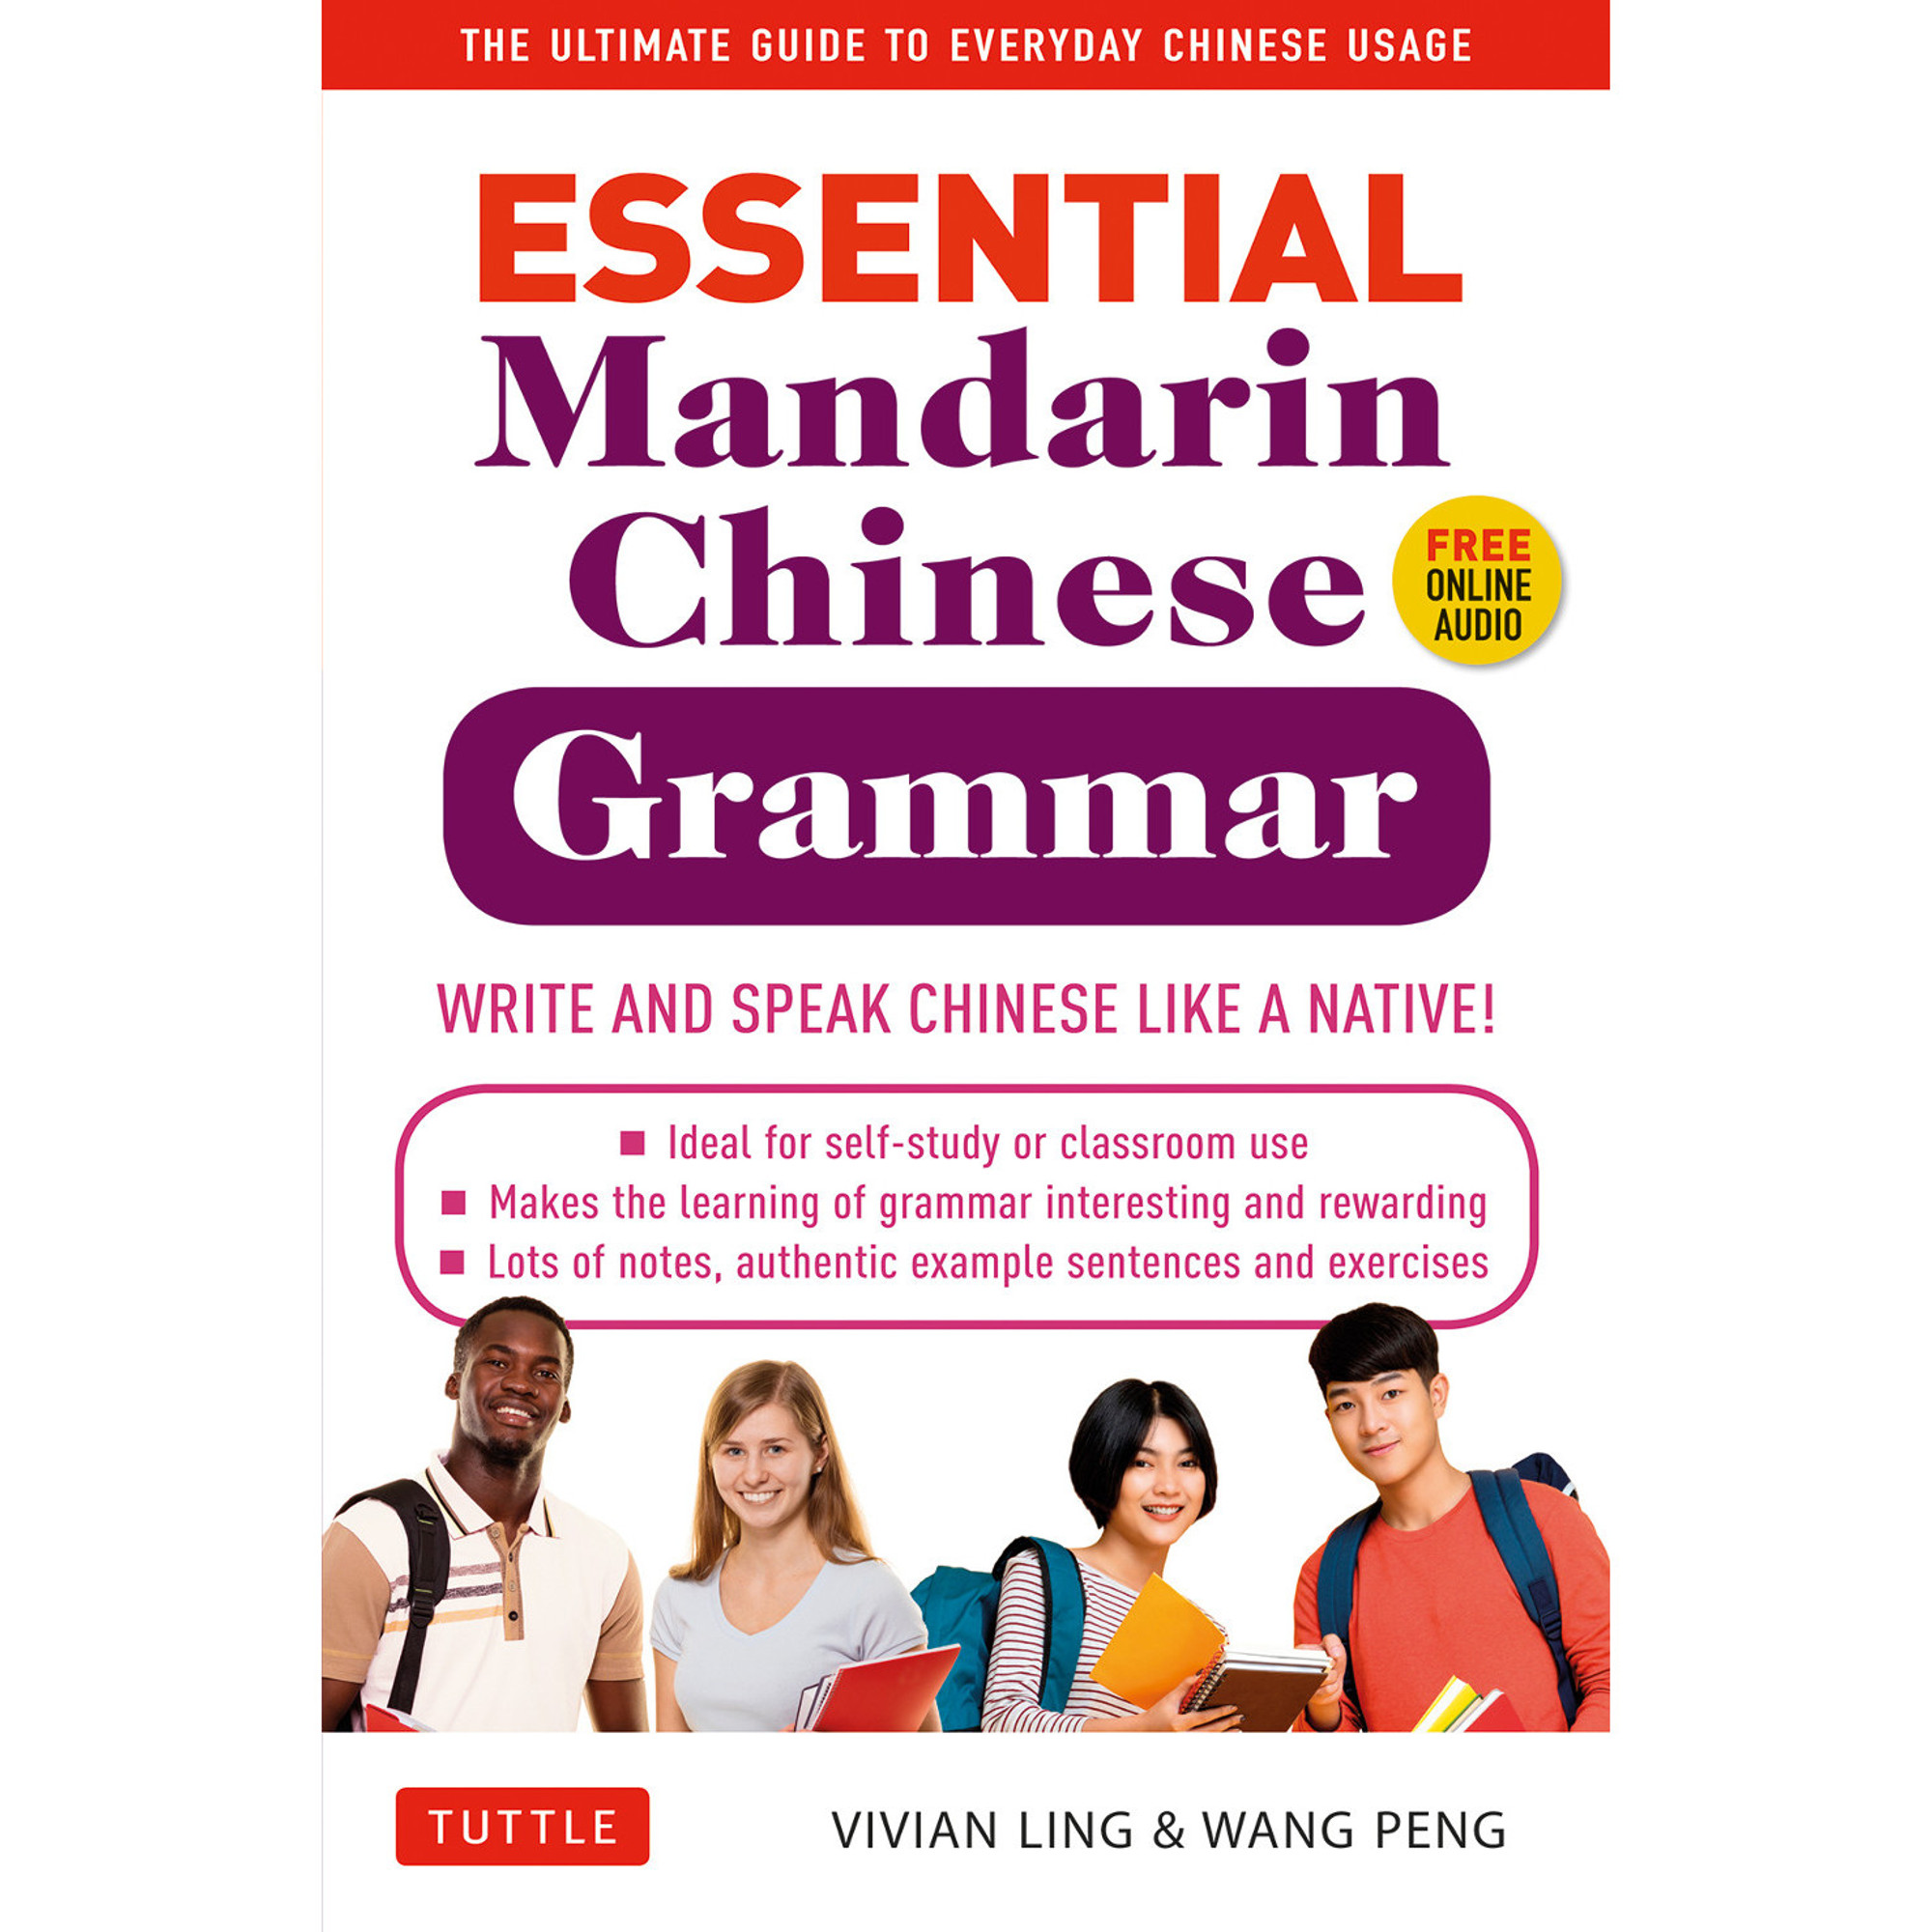 Grammar　Tuttle　(9780804851404)　Publishing　Essential　Chinese